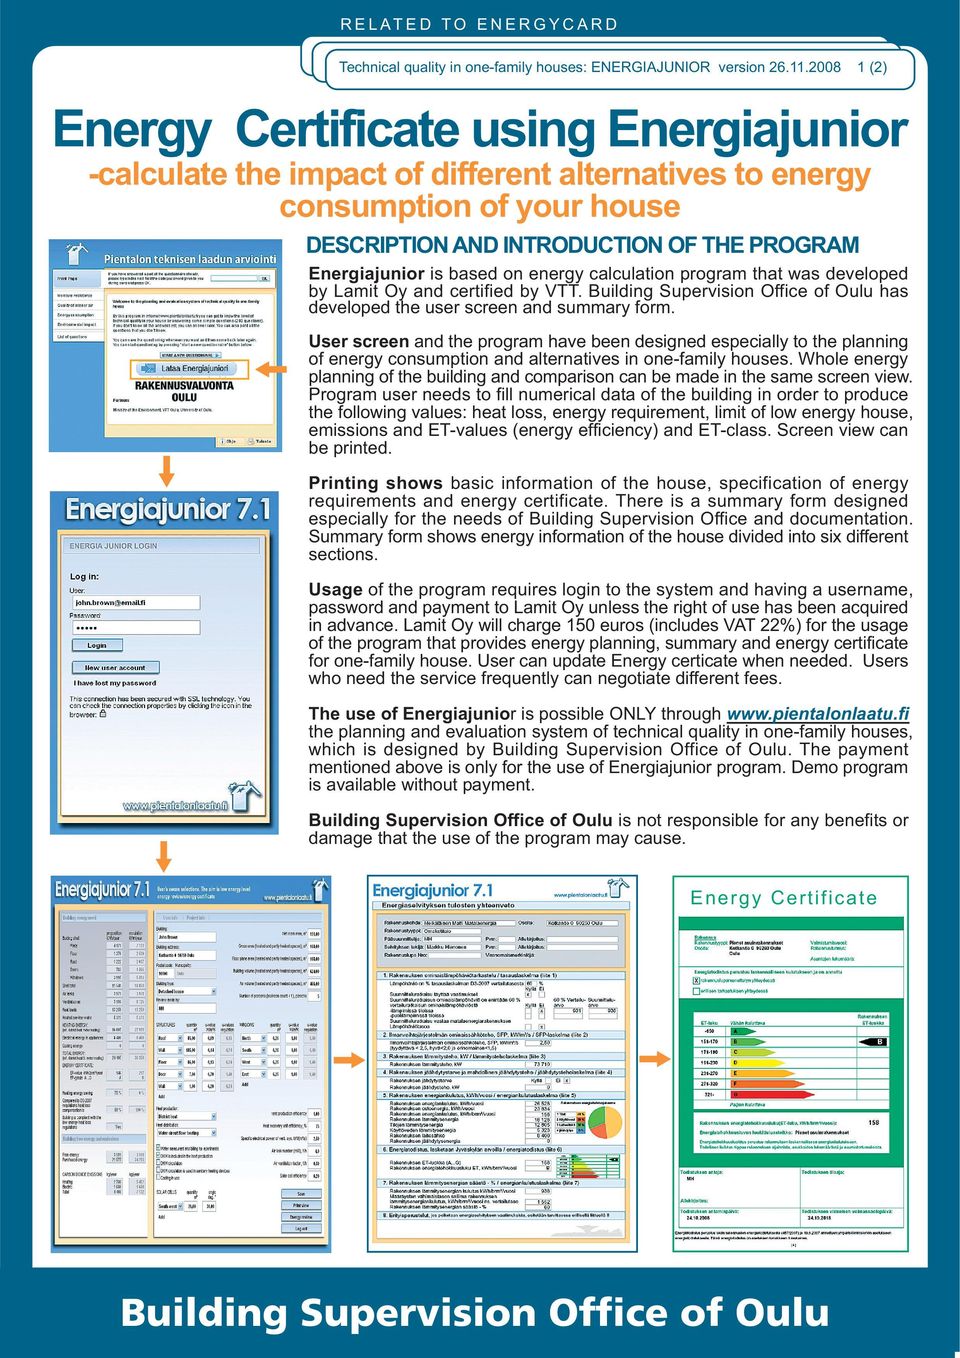 based on energy calculation program that was developed by Lamit Oy and certified by VTT. Building Supervision Office of Oulu has developed the user screen and summary form.